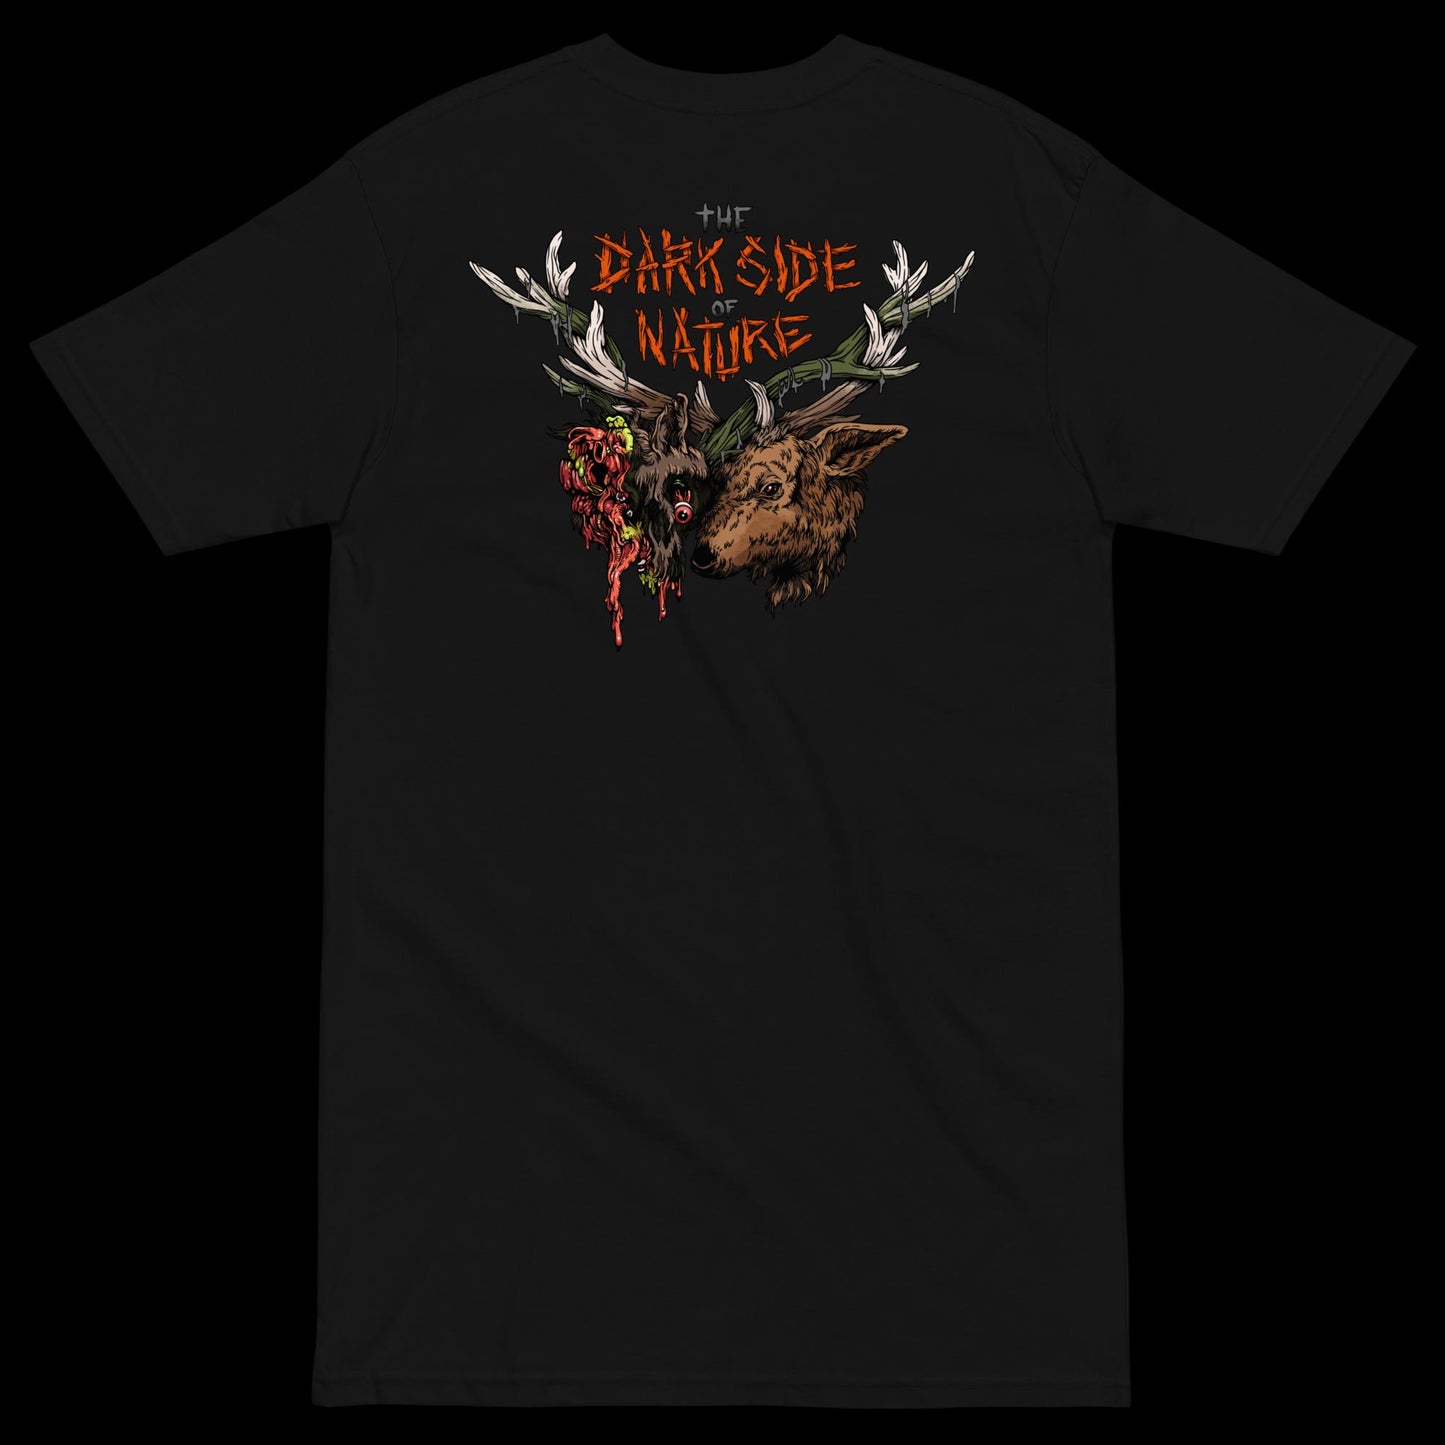 Staring Death in the Face Premium T-Shirt